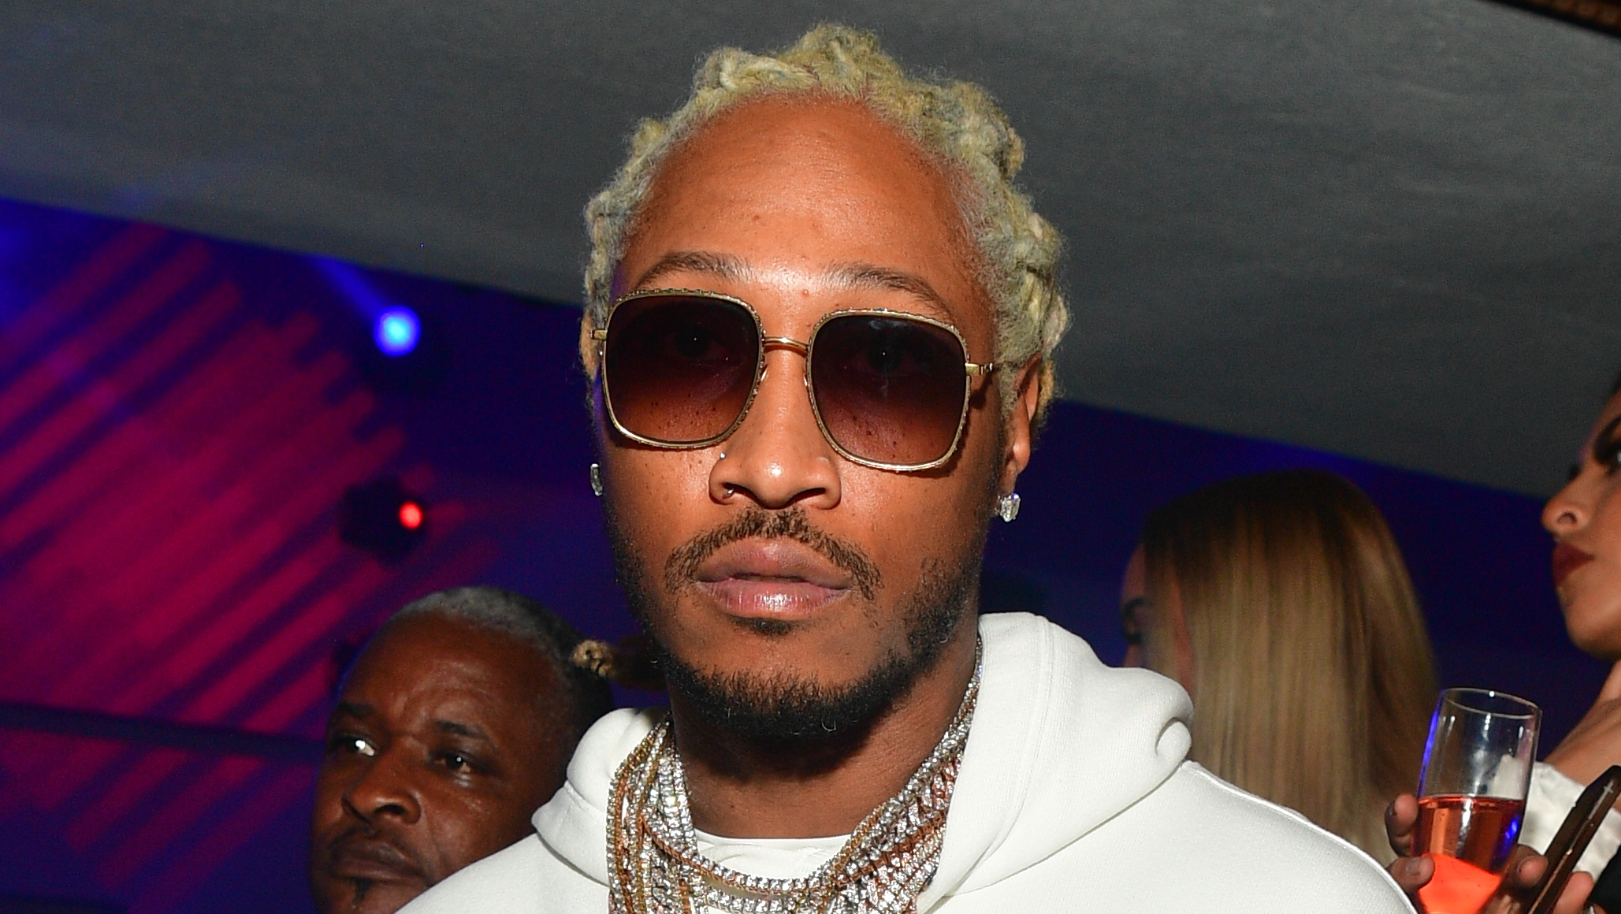 Rapper Future’s Alleged Baby Mama Eliza Reign Demands $53,000 A Month In Child Support